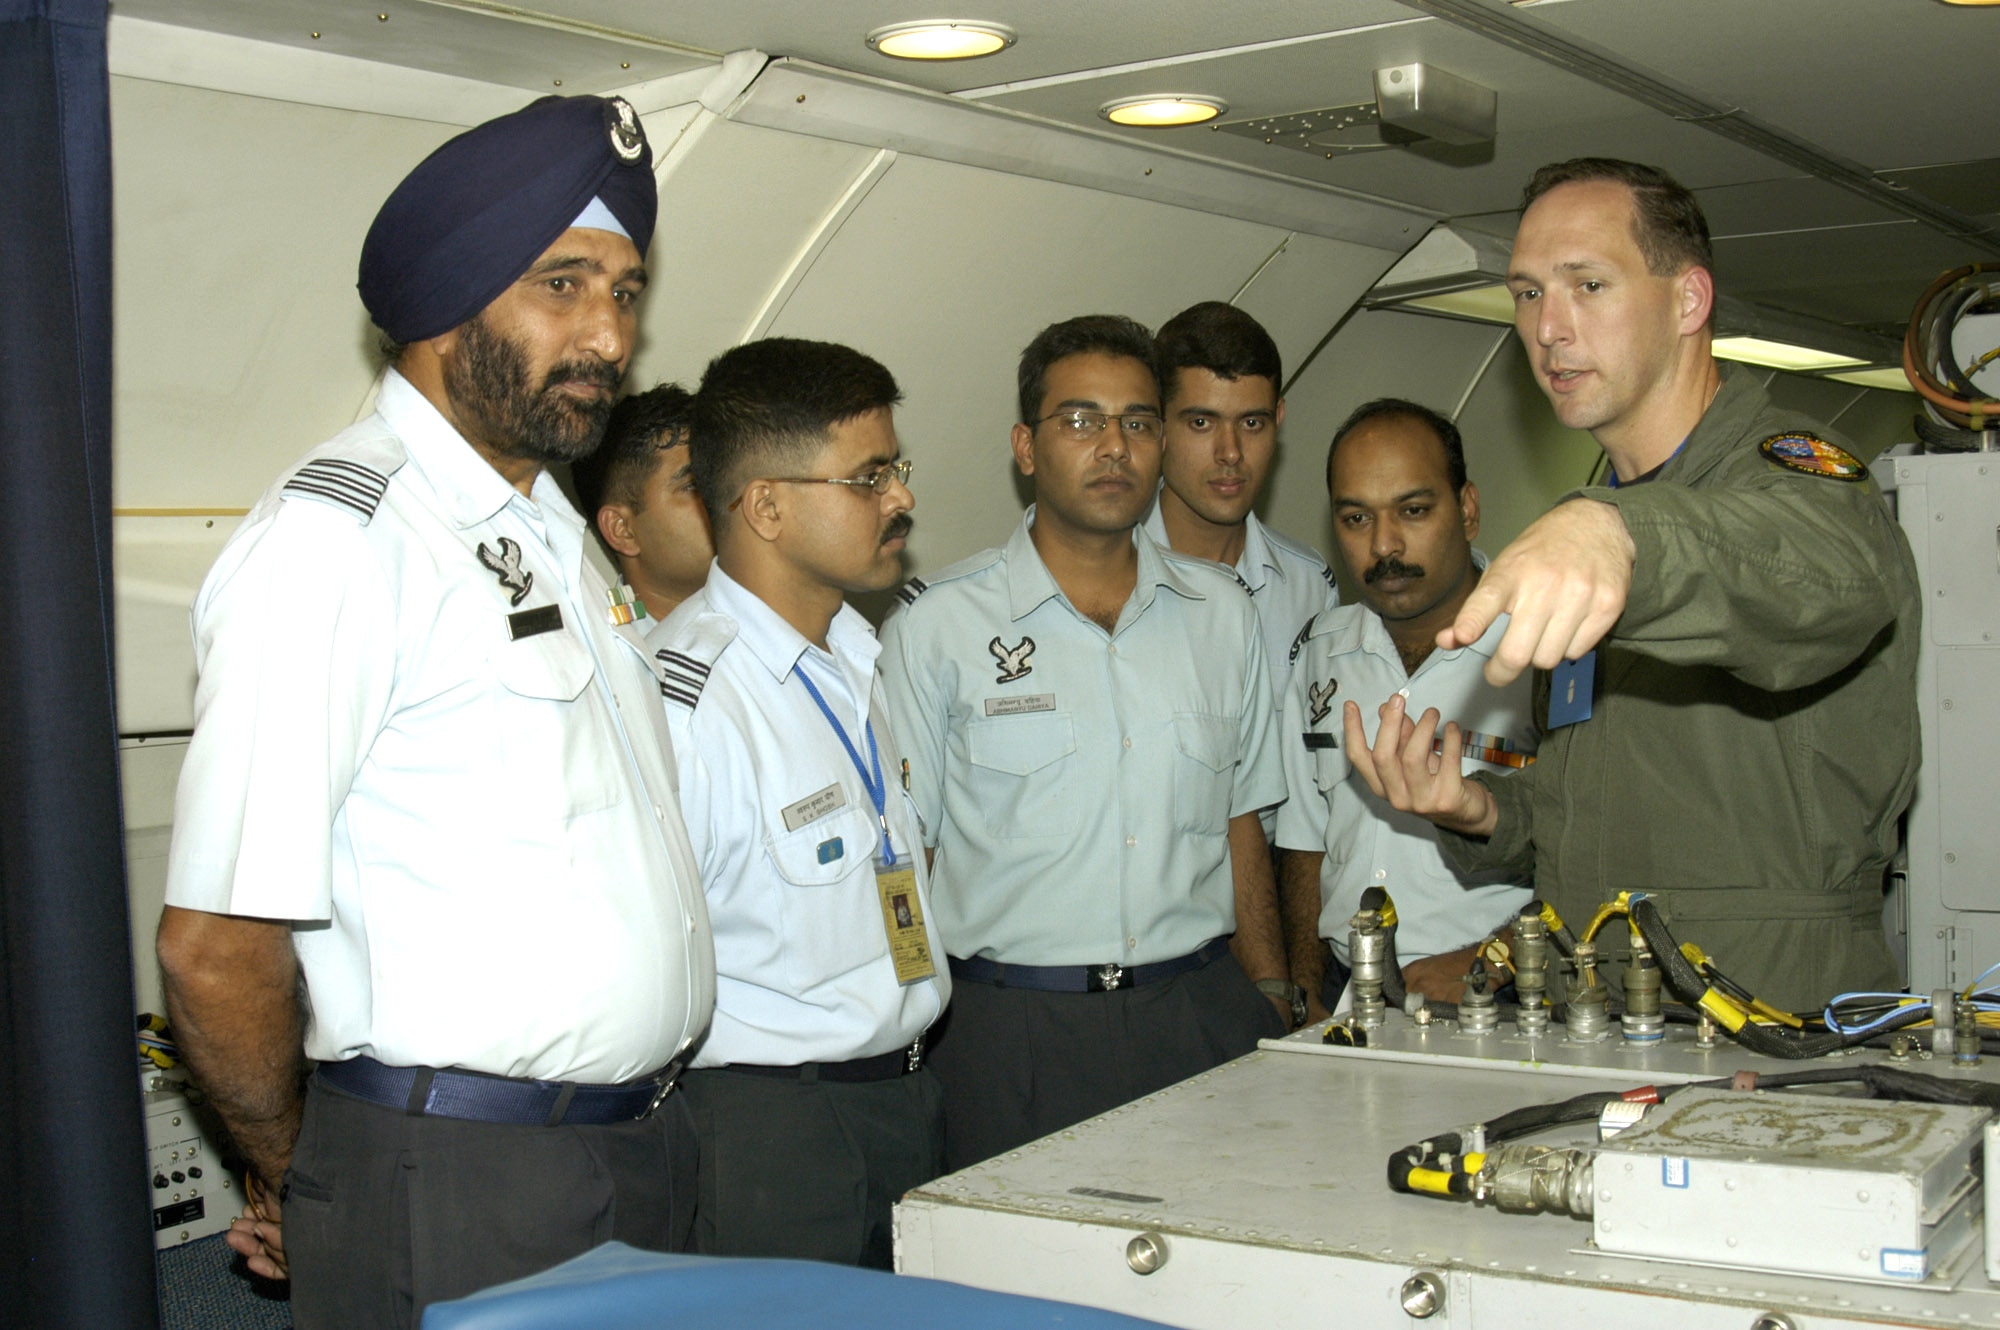 KALAIKUNDA AIR STATION, India (AFPN) -- Capt. James Munroe explains E-3 Sentry airborne warning and control system aircraft capabilities to Indian Air Force radar officers during exercise Cope India '06 here. Captain Munroe is from the 961st Airborne Air Control Squadron, Kadena Air Base, Japan.  The exercise began Nov. 7.  (U.S. Air Force photo by Tech. Sgt. Martin Jackson) 